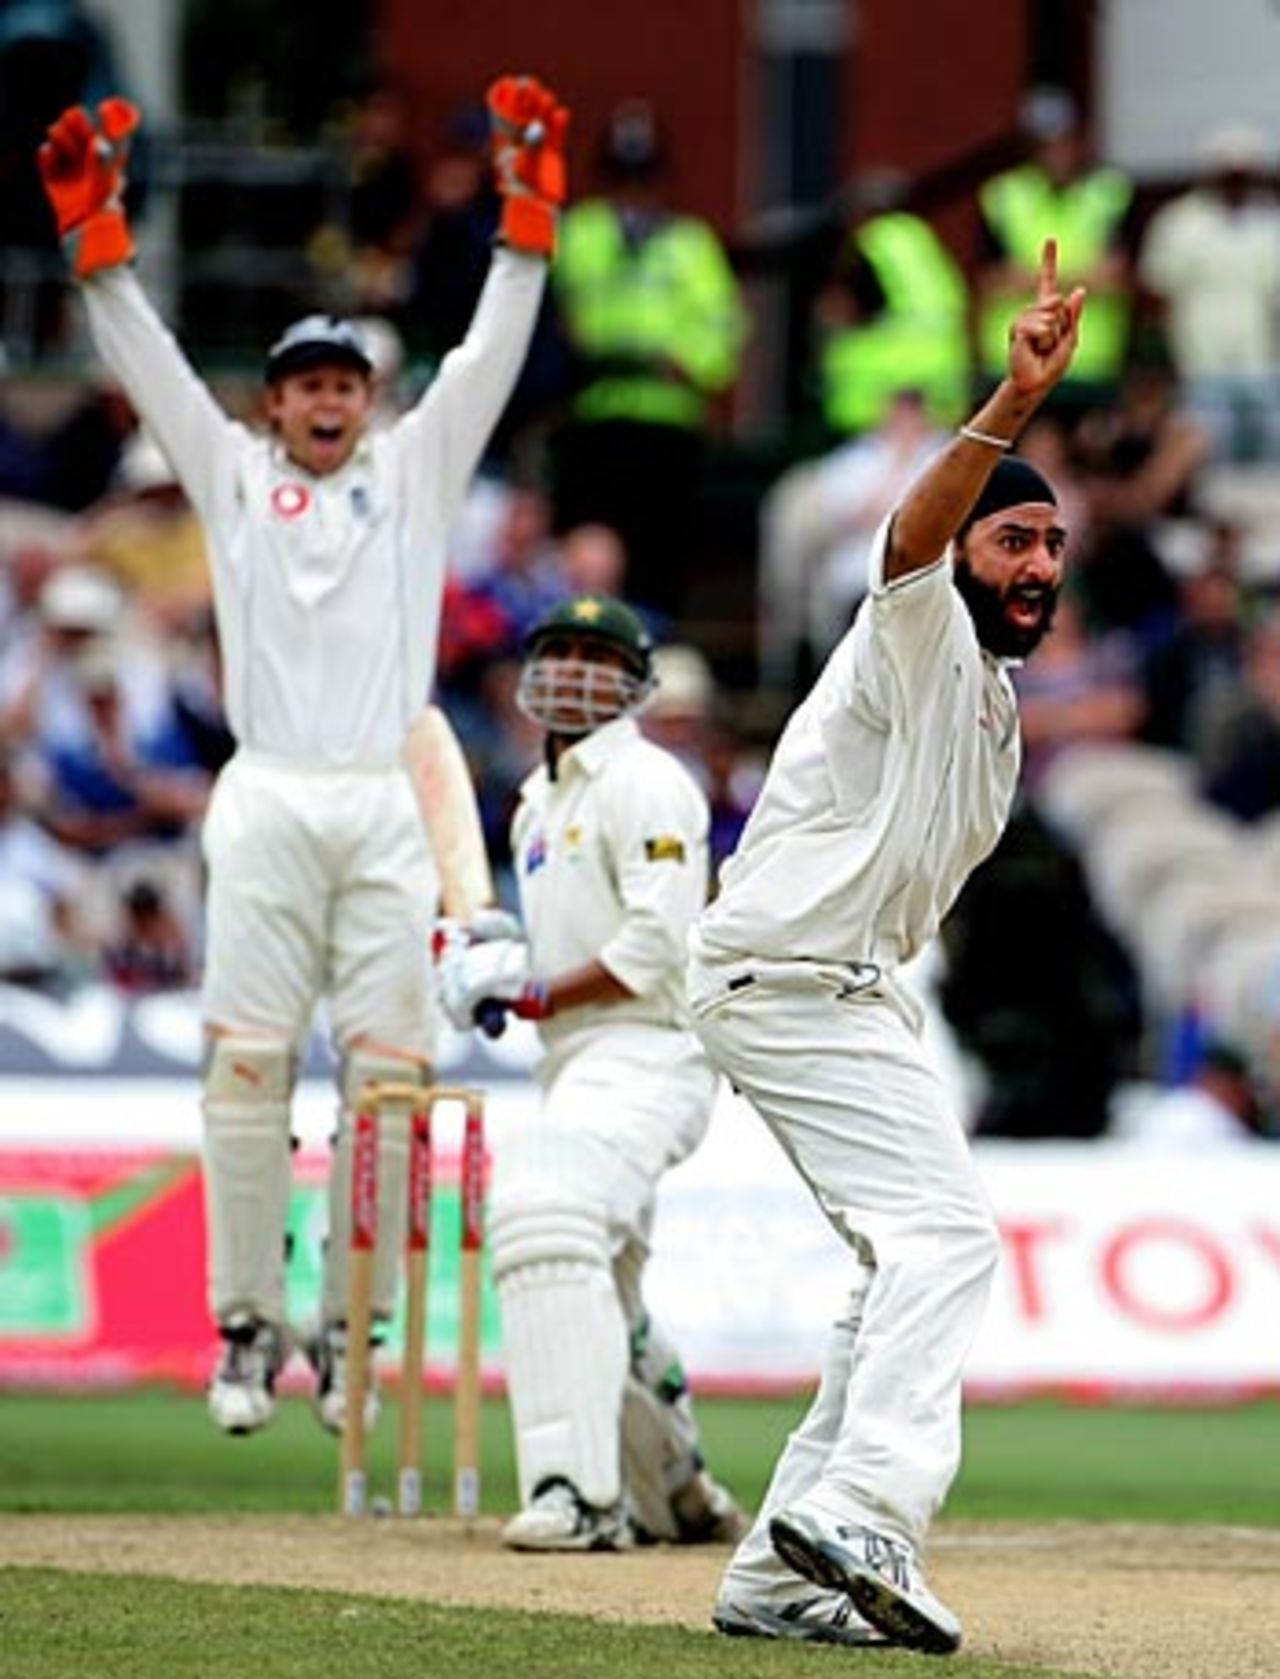 Monty Panesar and Geraint Jones successfully appeal for Younis Khan's wicket, England v Pakistan, 2nd Test, Old Trafford, July 29, 2006